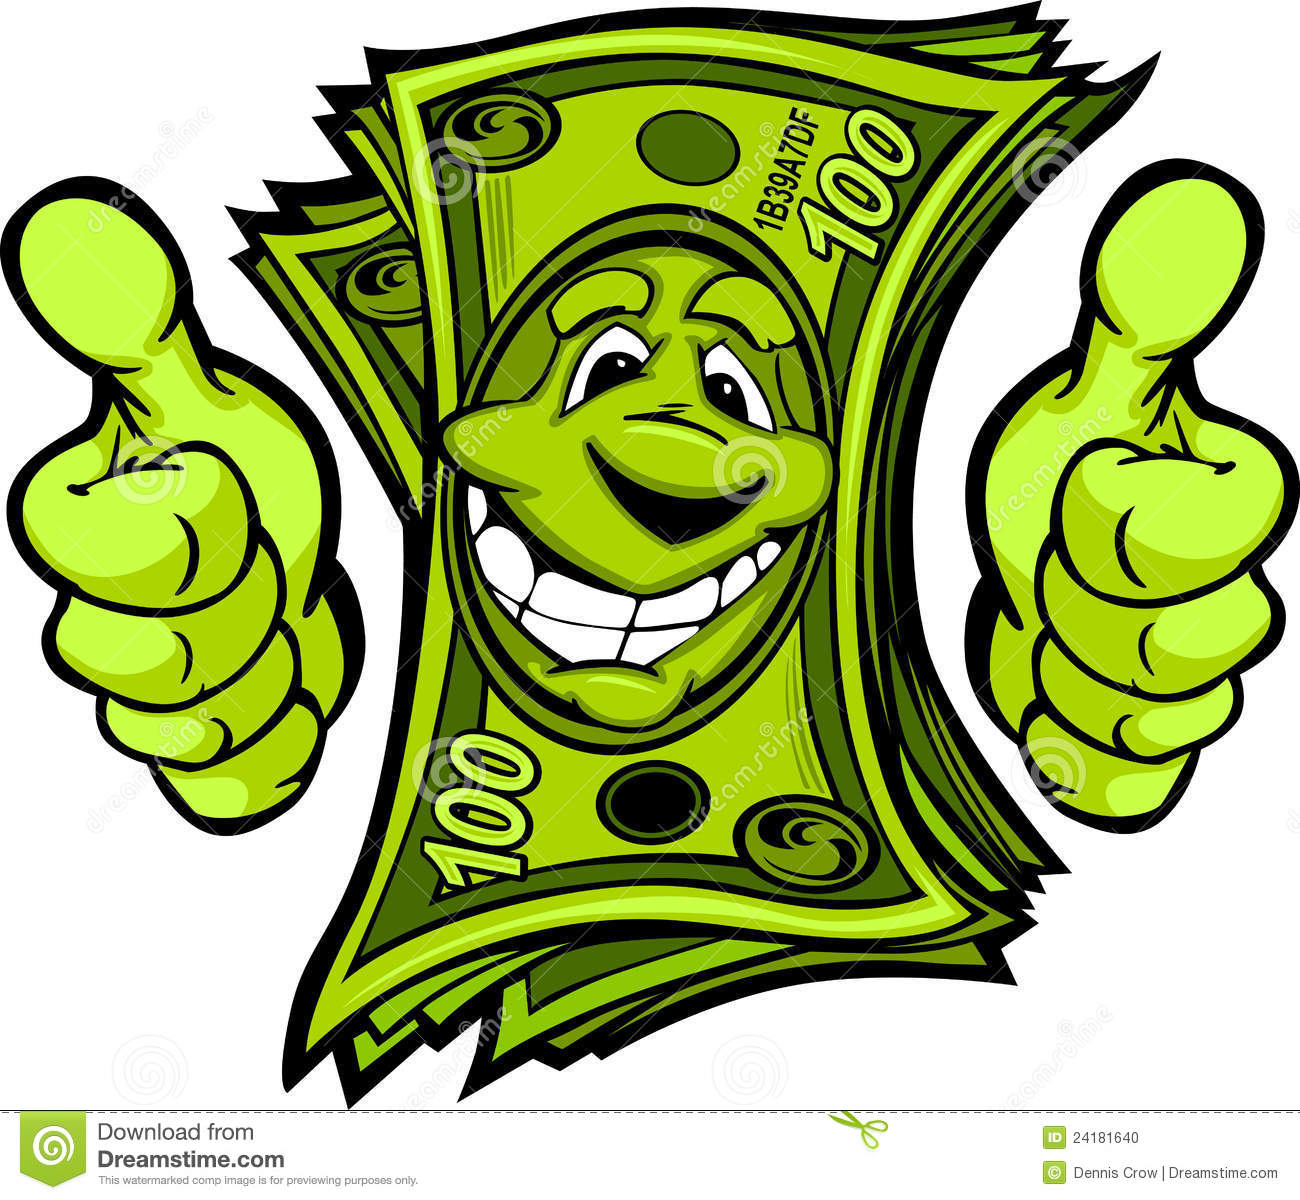 Cartoon Money And Hands With Thumbs Up Cartoon Image